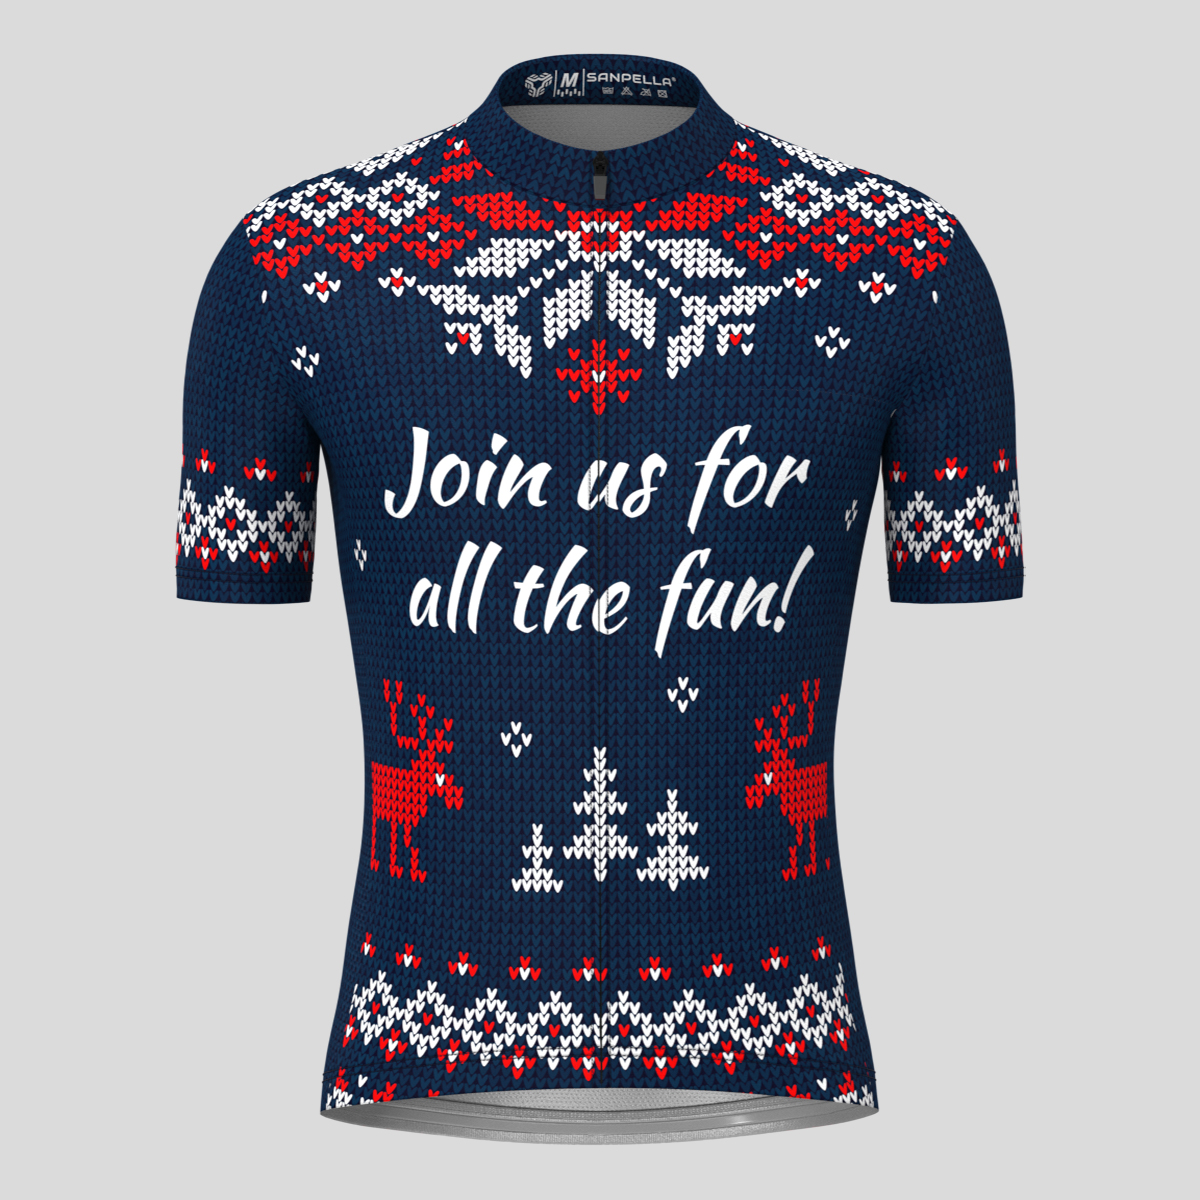 XMAS Ugly Sweater Themed Men's Cycling Jersey - Blue